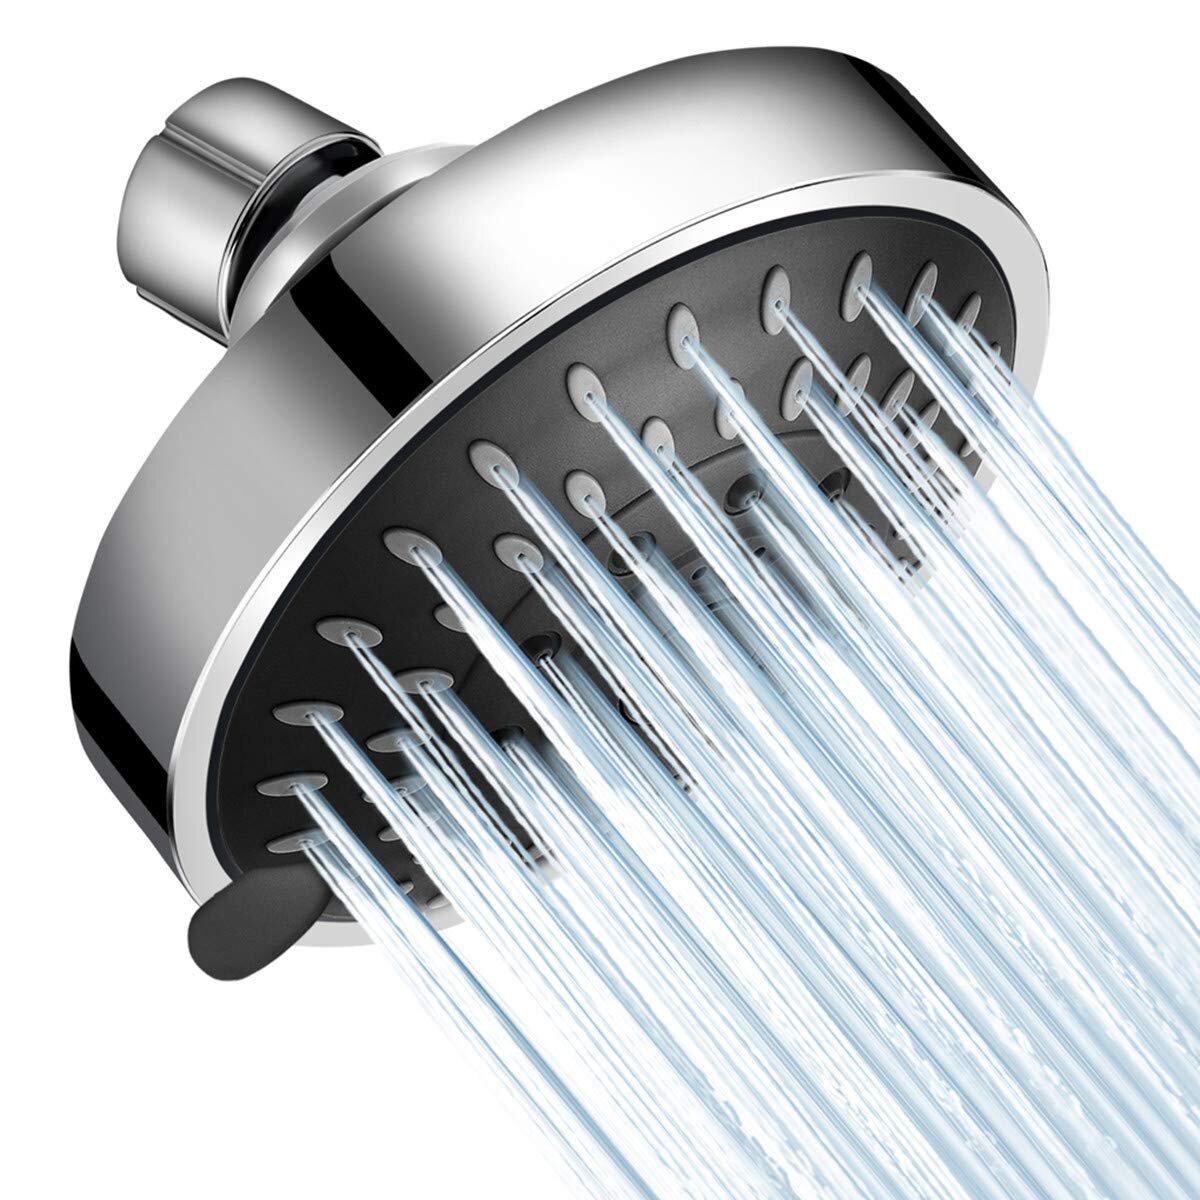 4 Inch High Flow/Pressure Fixed Shower Head 5-Setting Adjustable for Bathroom 